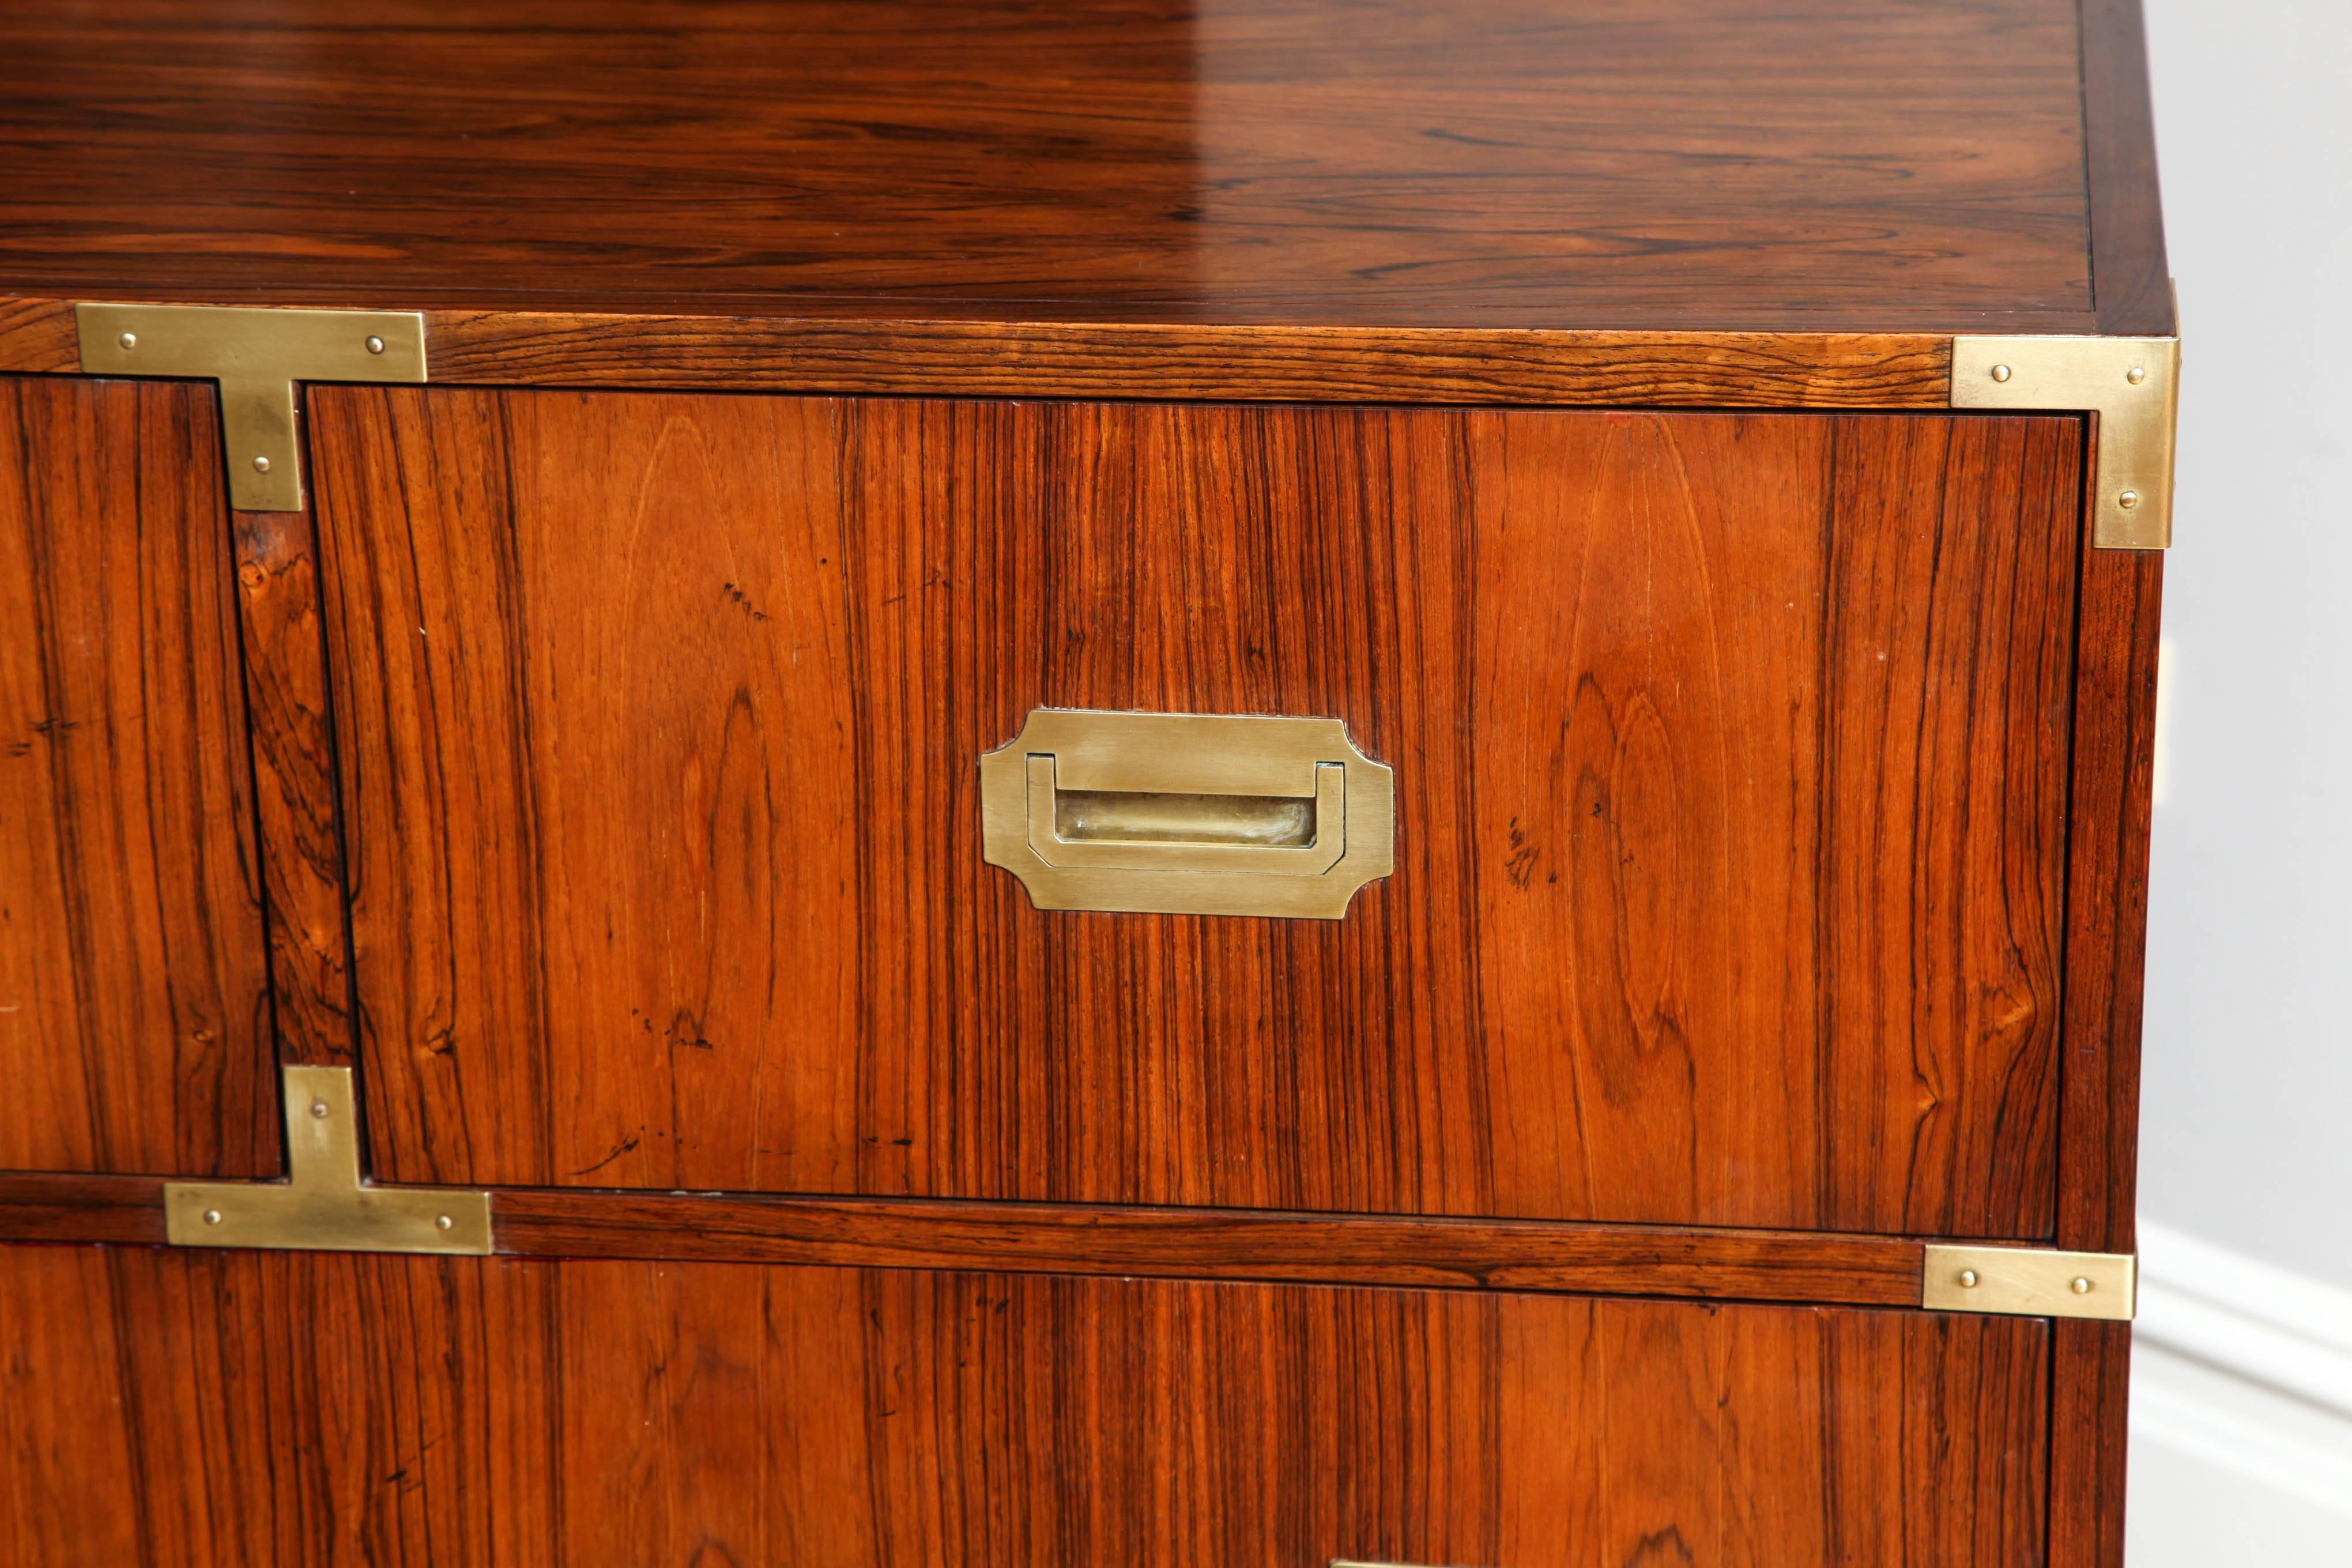 A Rosewood Veneered Anglo-Indian style campaign chests with recessed brass pulls and brass bound edges. The secondary wood and drawers fabricated with hardwoods. The drawer interior bearing label of American maker Baker. Circa 1960. 